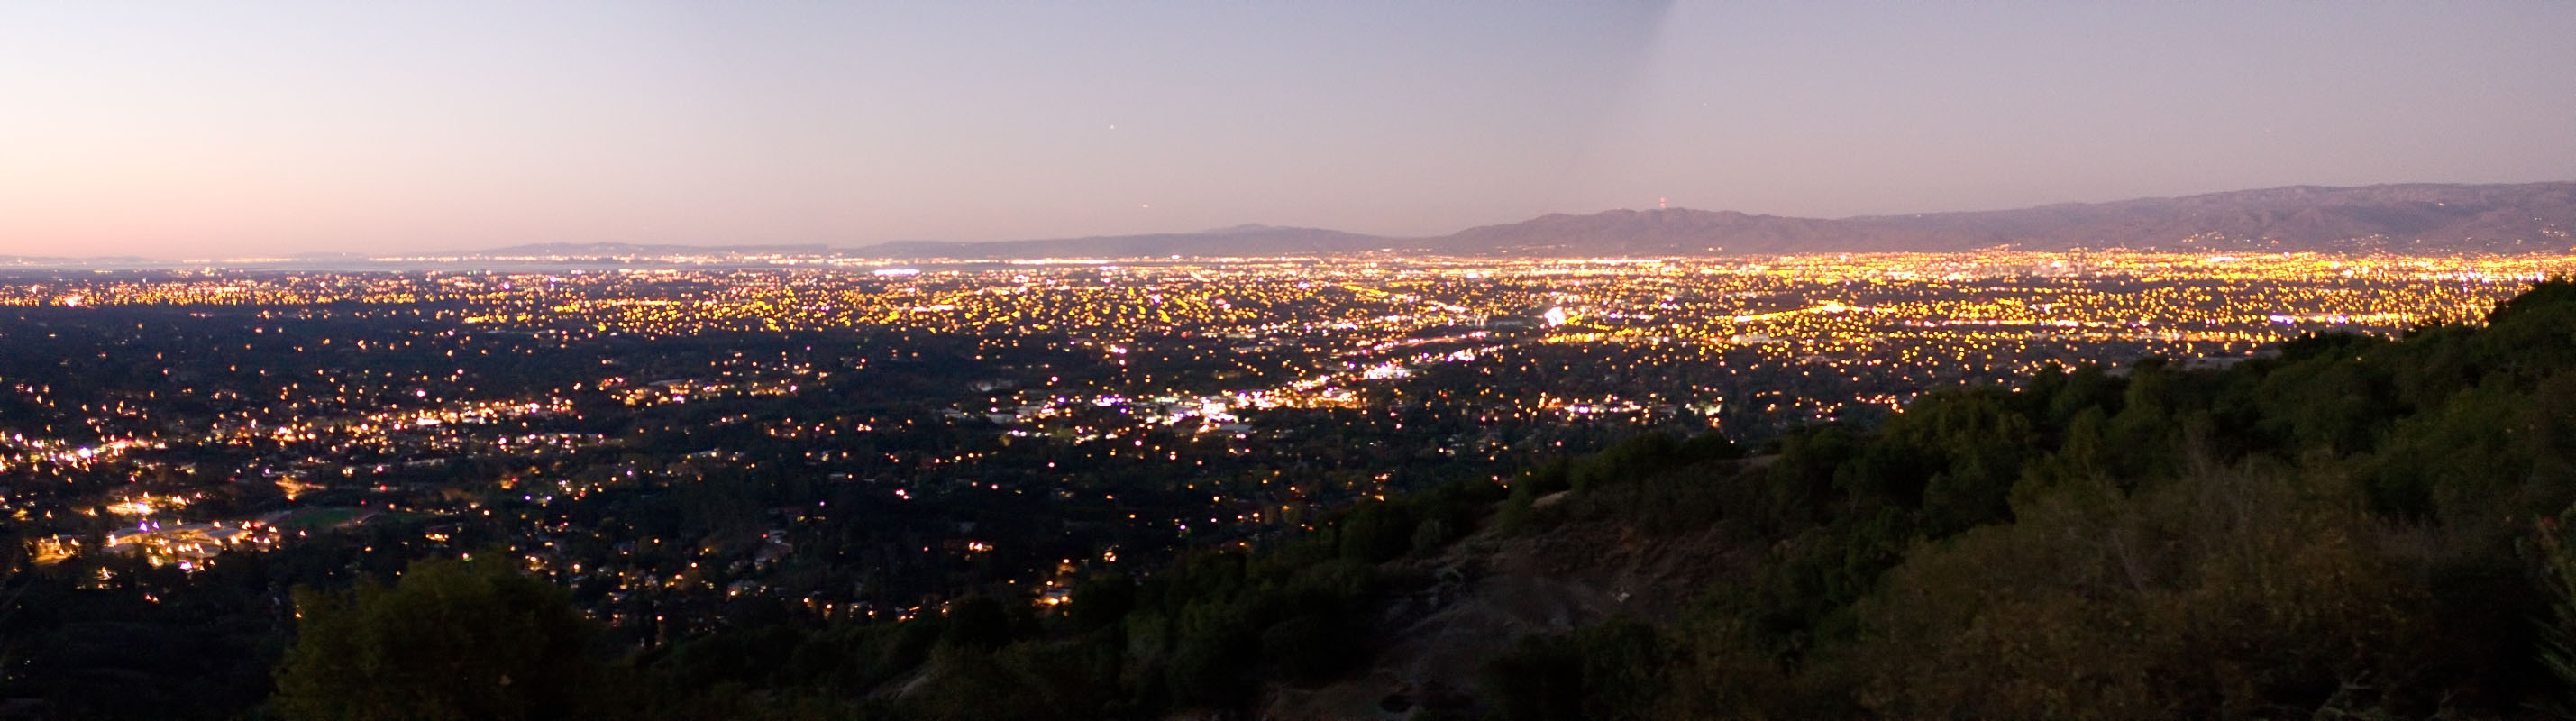 Night time Pano of Silicon Valley